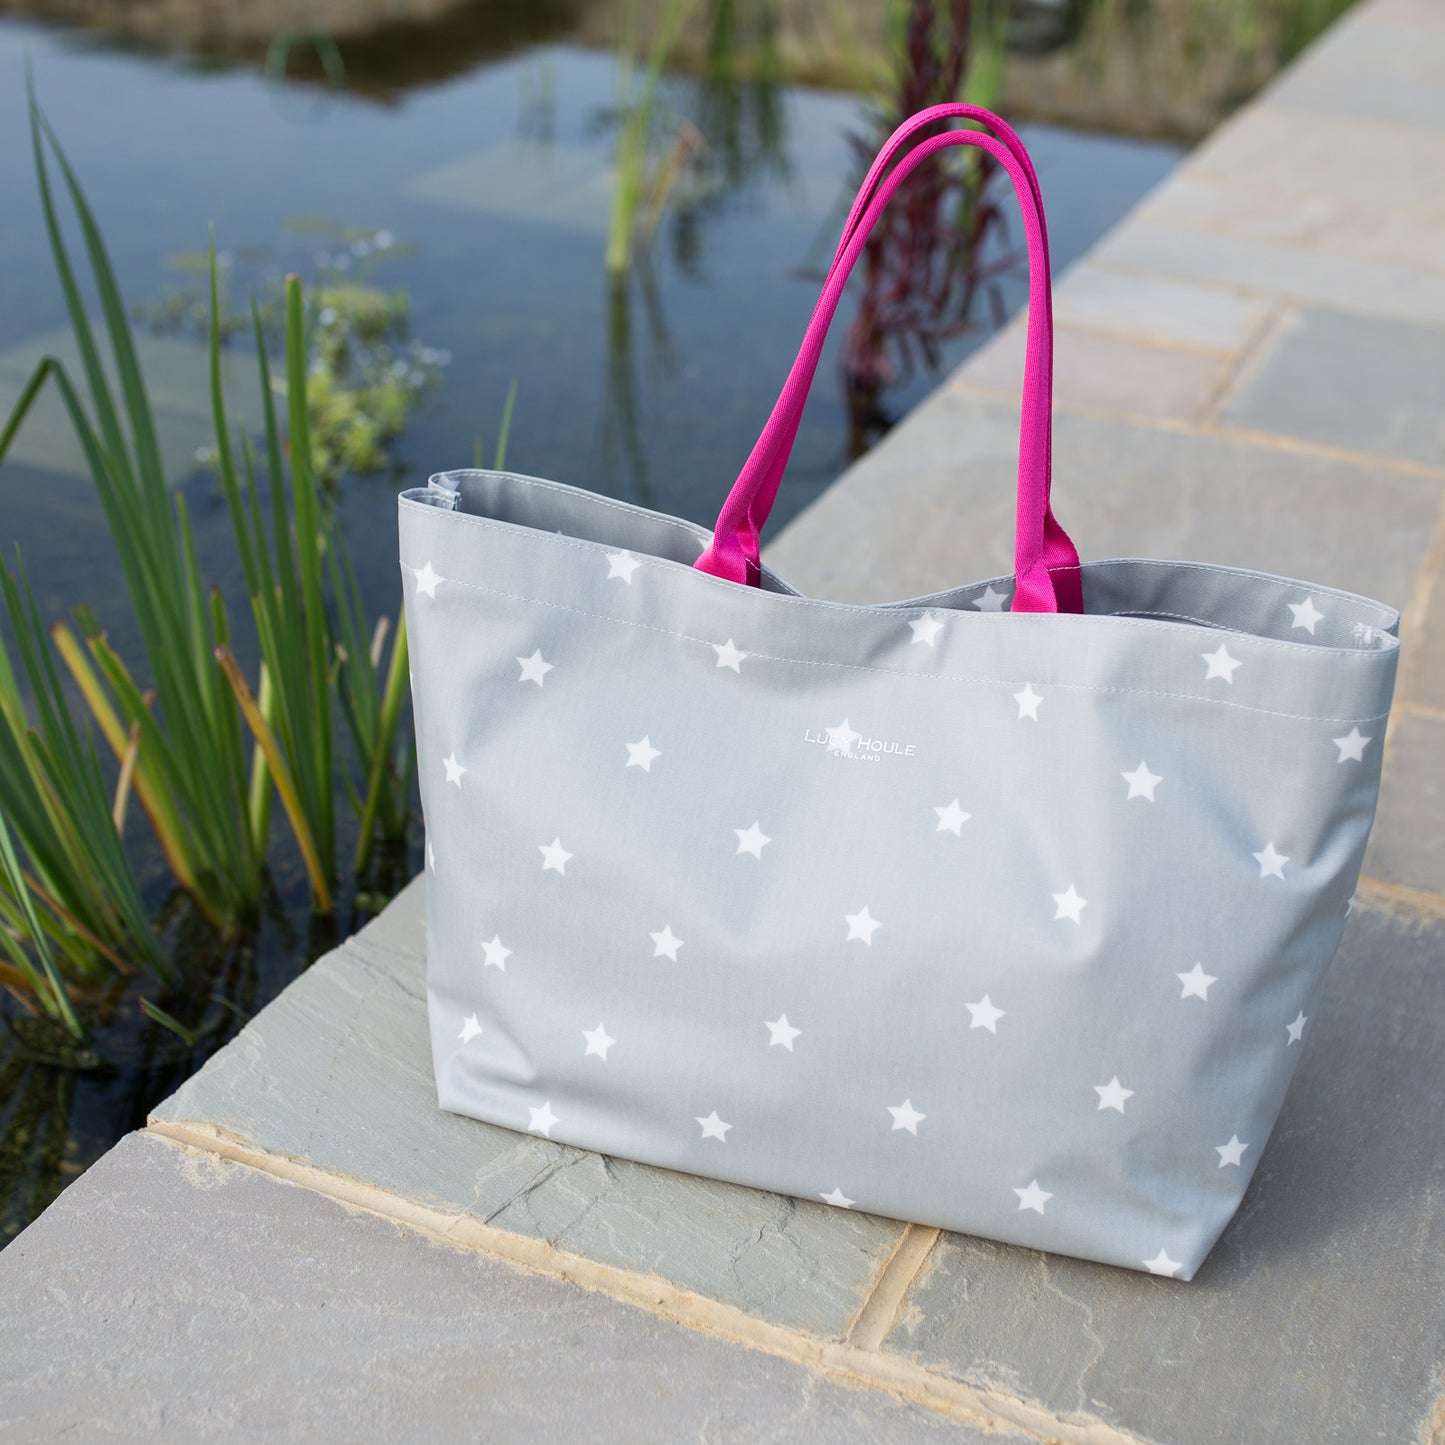 Pink Tote bag with star pattern